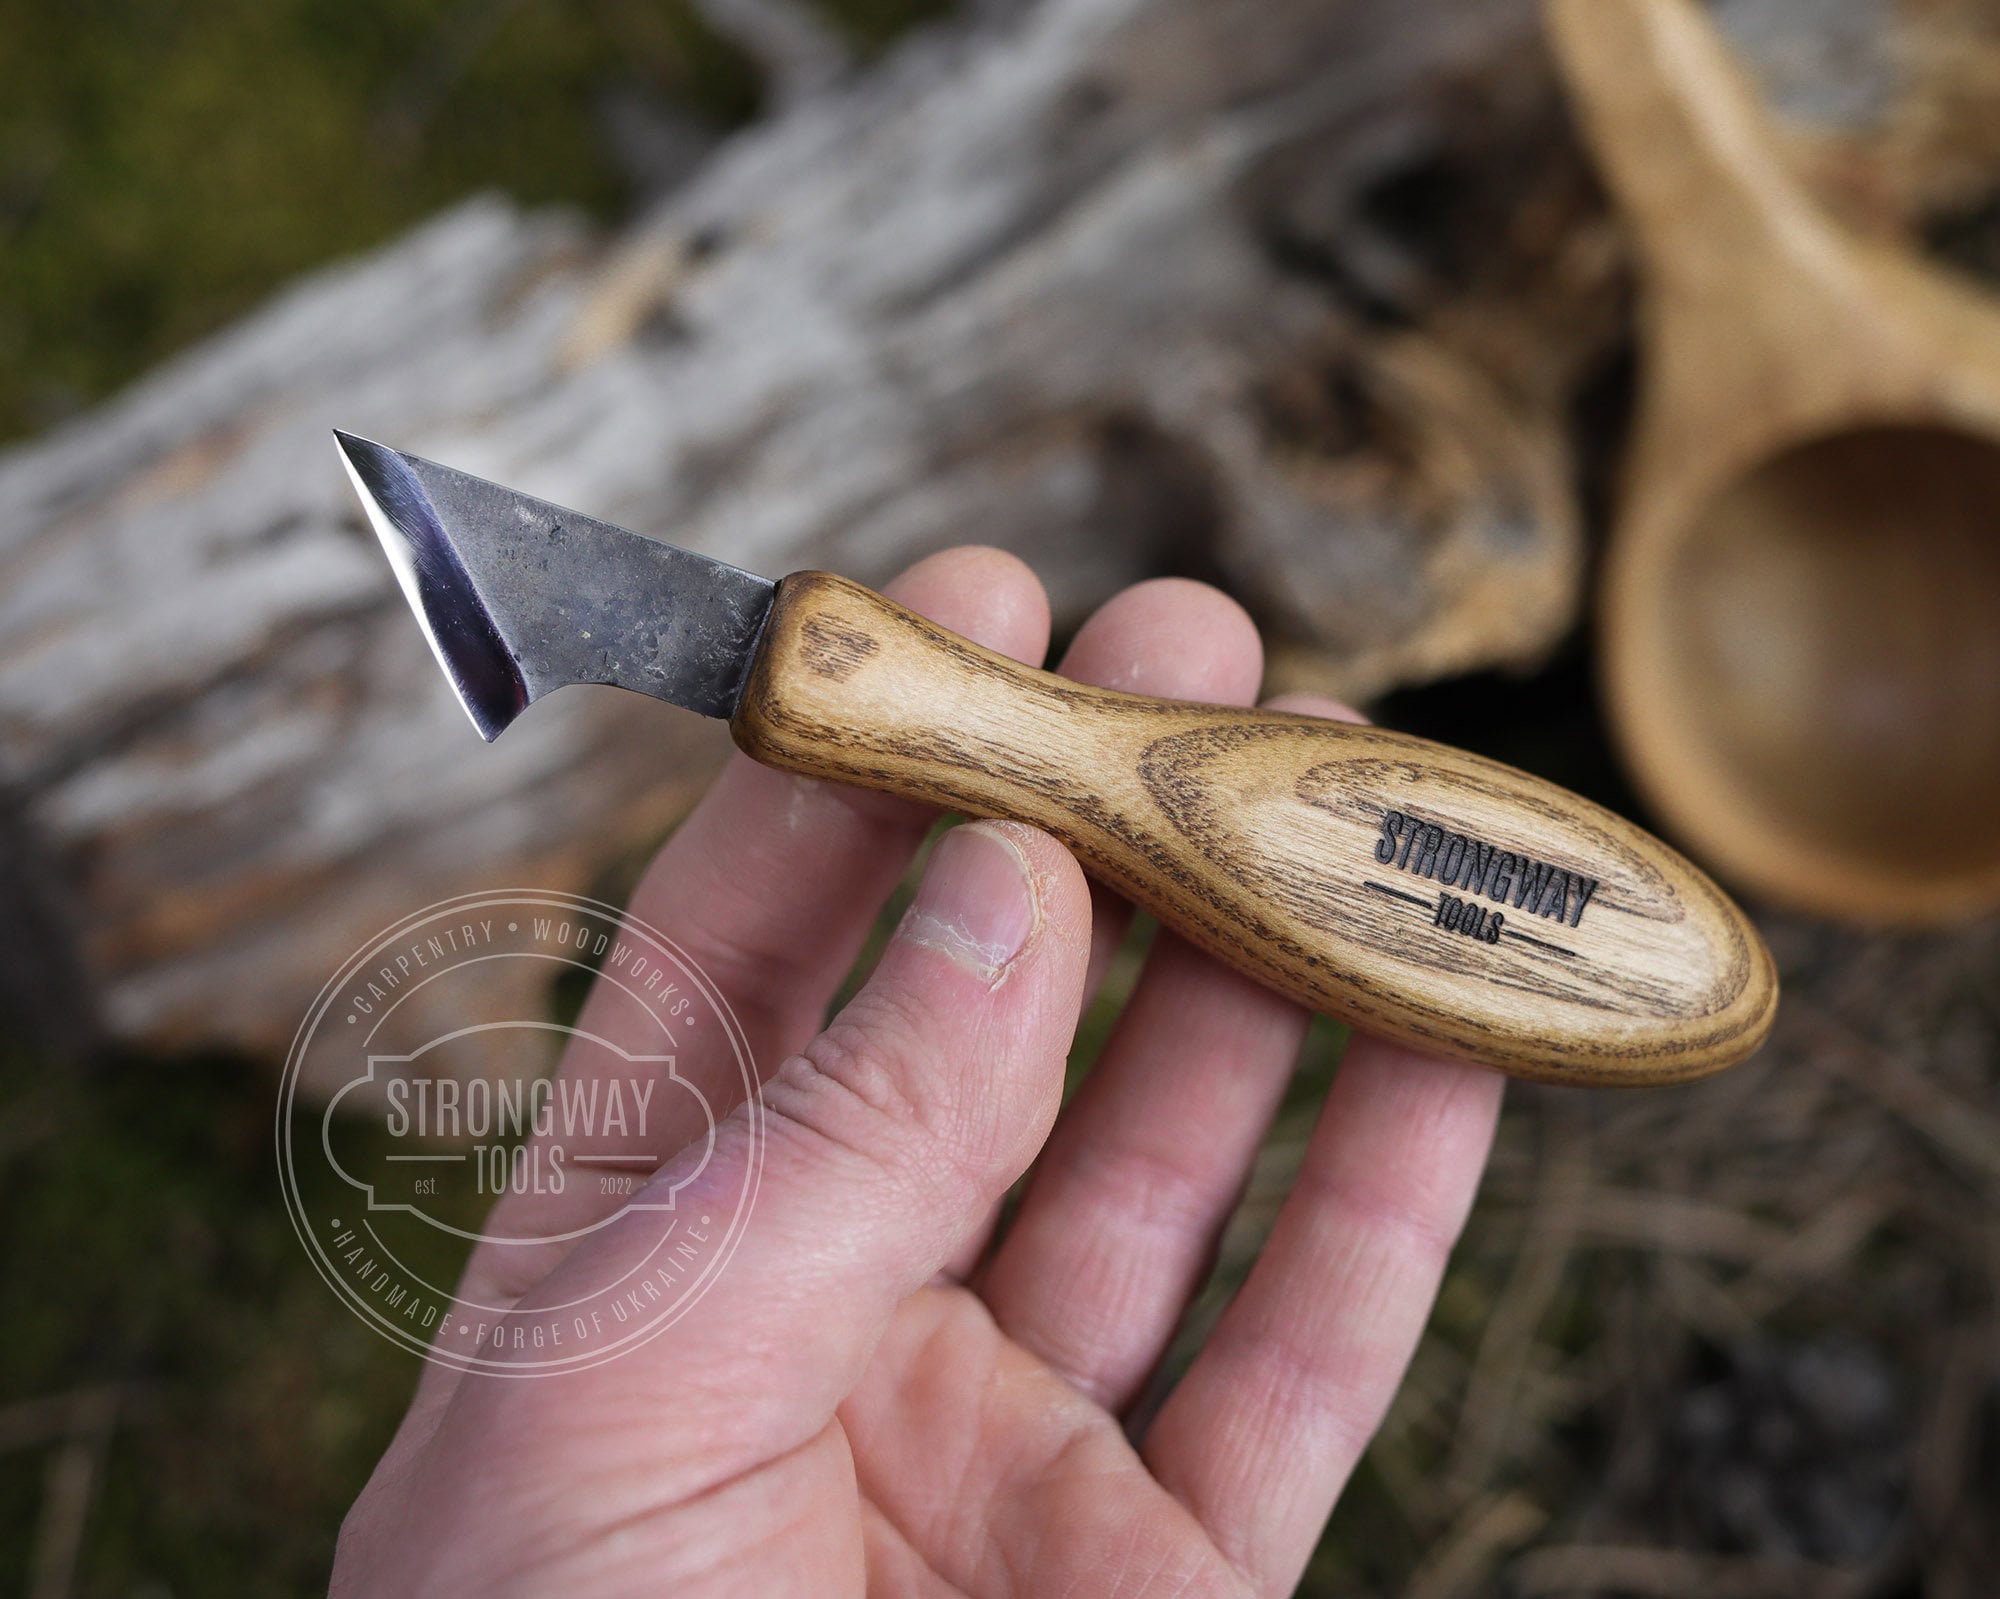 Finnish Carving Axe with octagonal handle